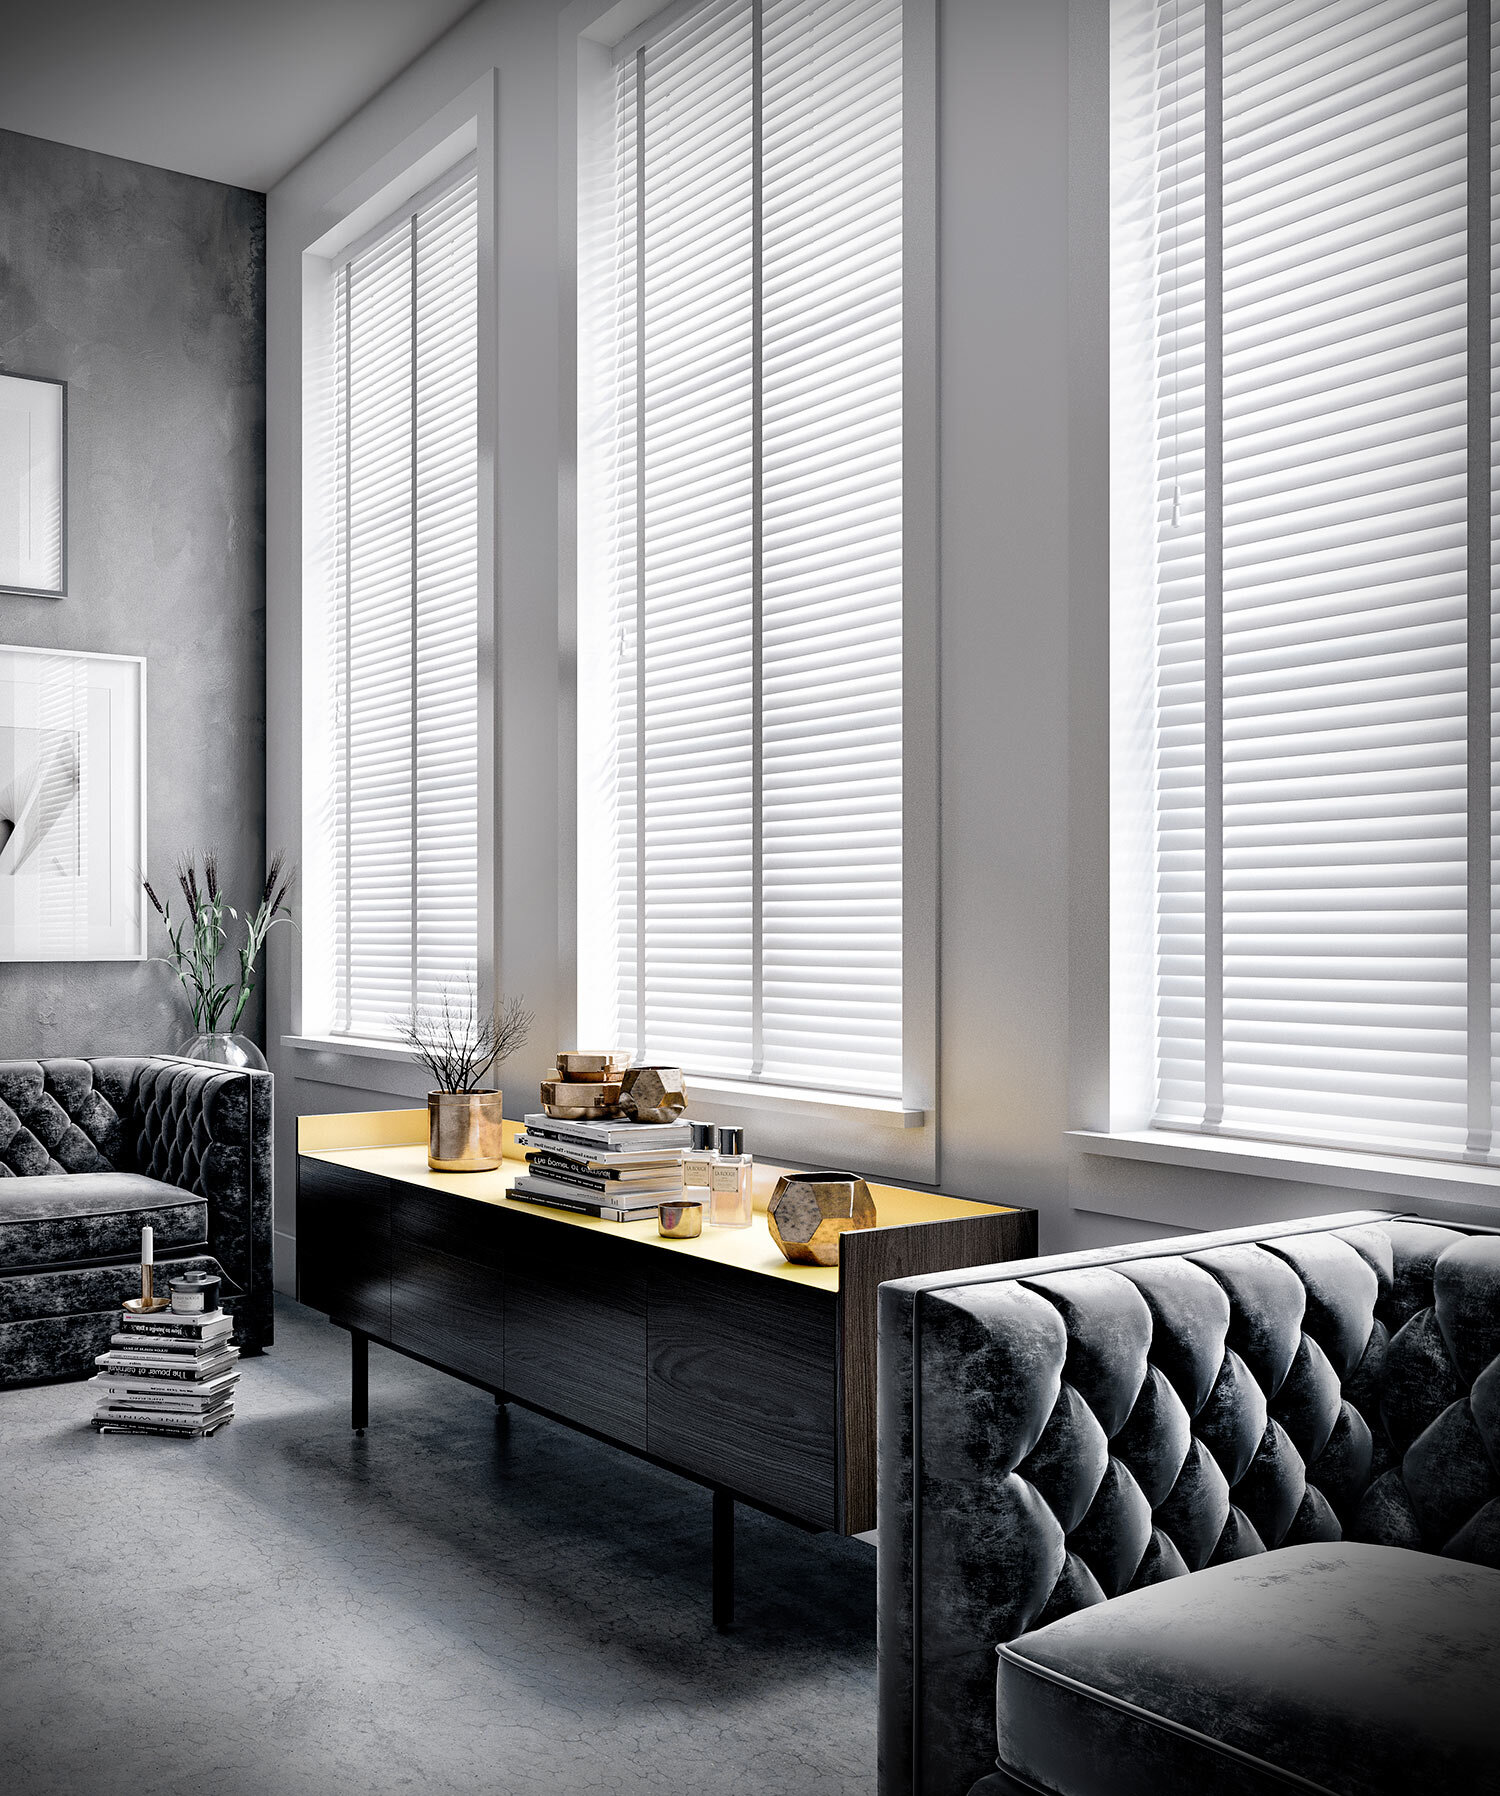 Electric Window Blinds Andover. Electric blinds can either be mains or battery powered. We offer a great retro-fit rechargeable battery solution for all types of remote controlled window blinds 